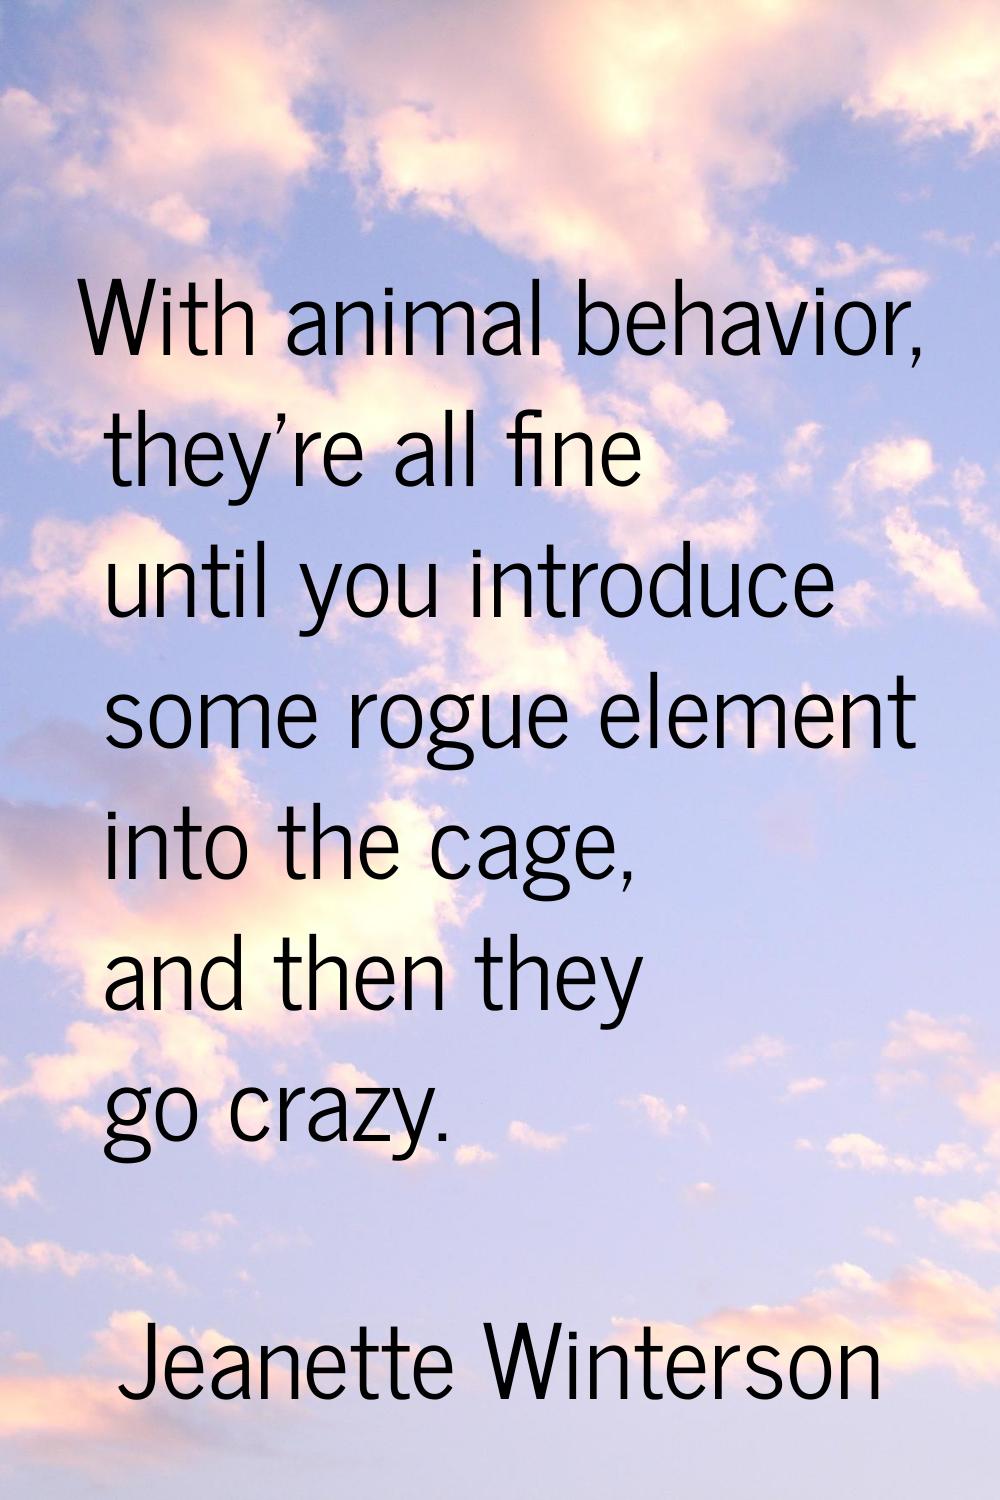 With animal behavior, they're all fine until you introduce some rogue element into the cage, and th